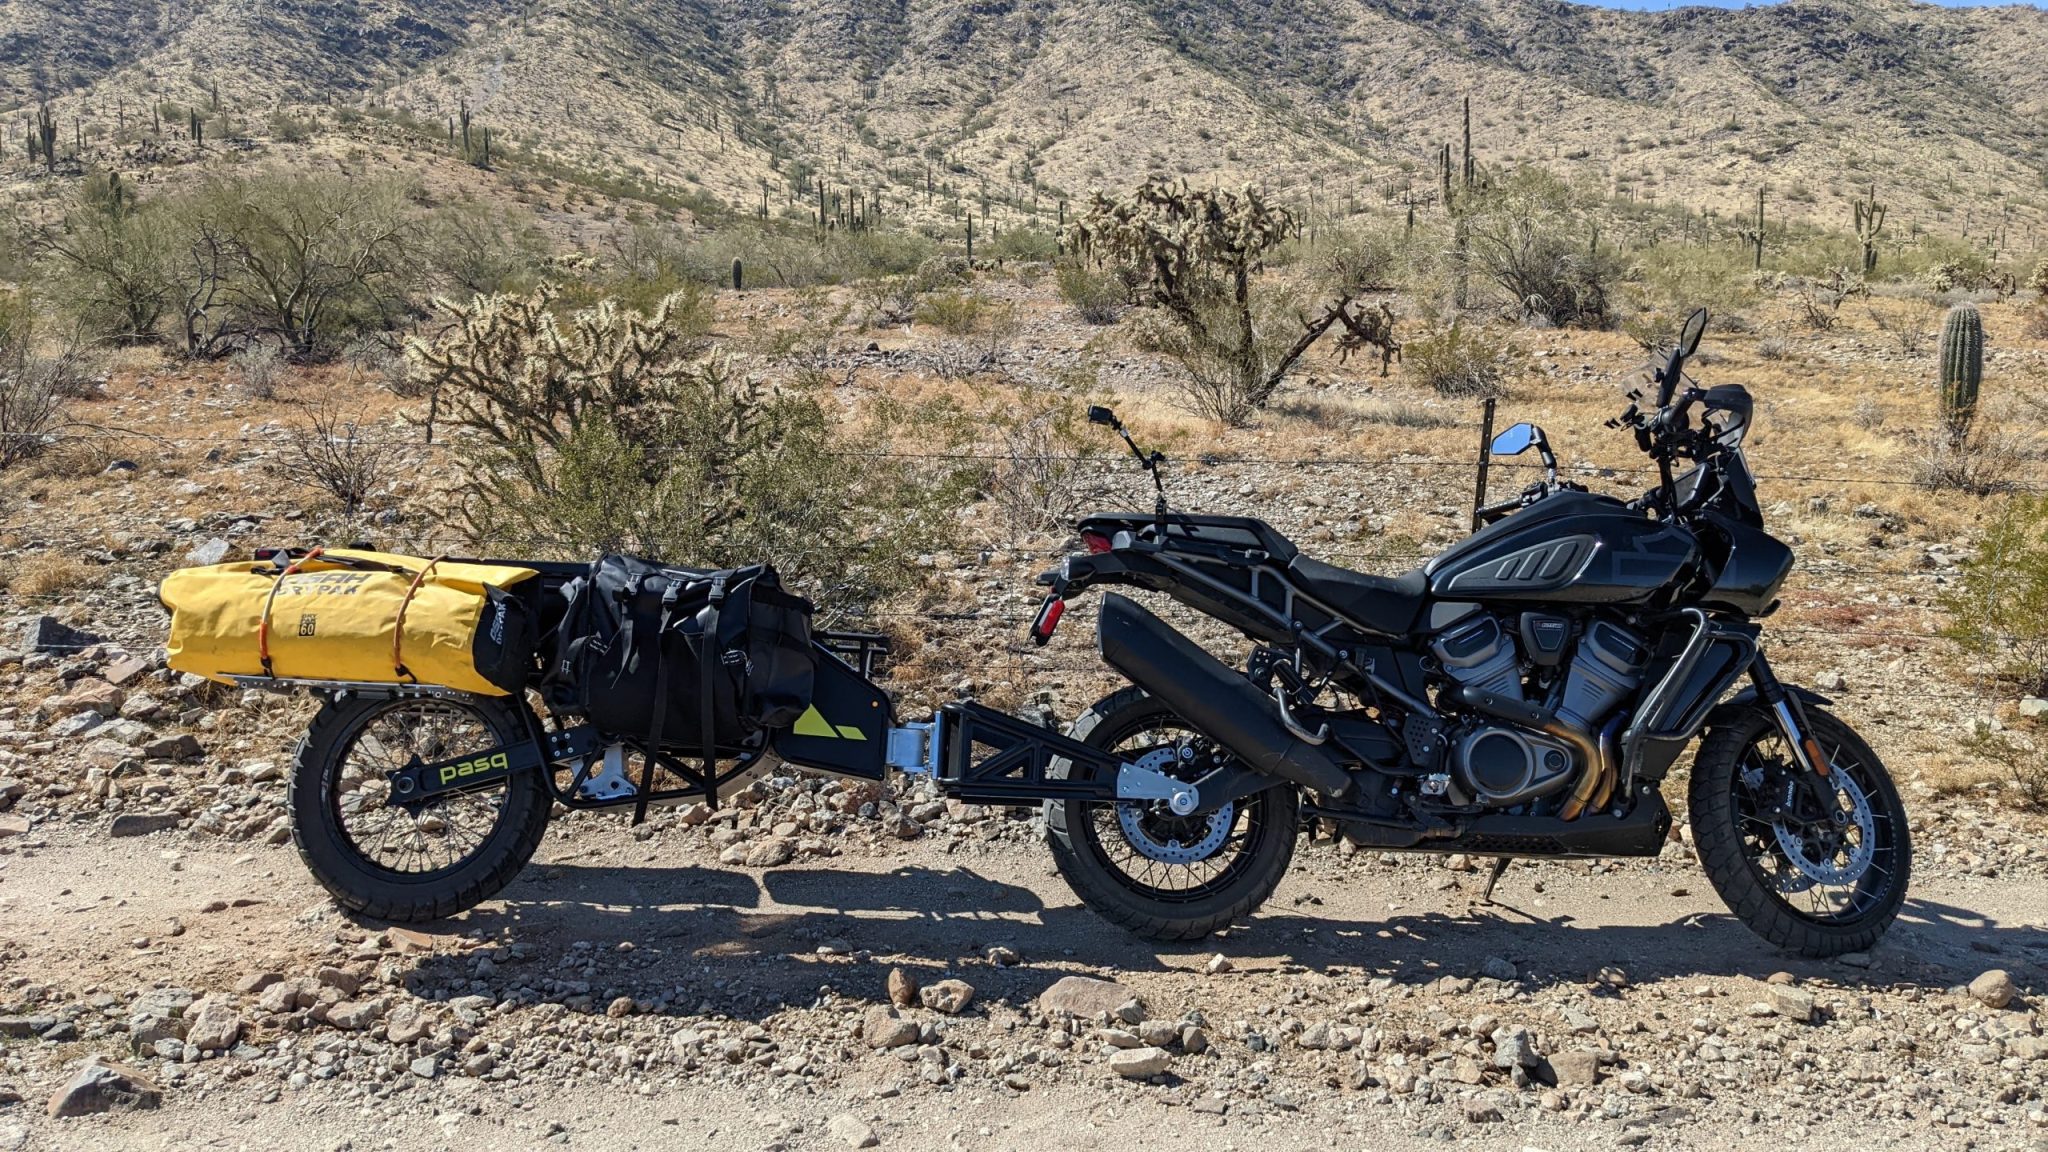 THe ADV1 trailer connected to a bike parked in the Arizona desert. The ADV1 has a yellow duffel bag and a black soft bag attached to the front side. End ID.